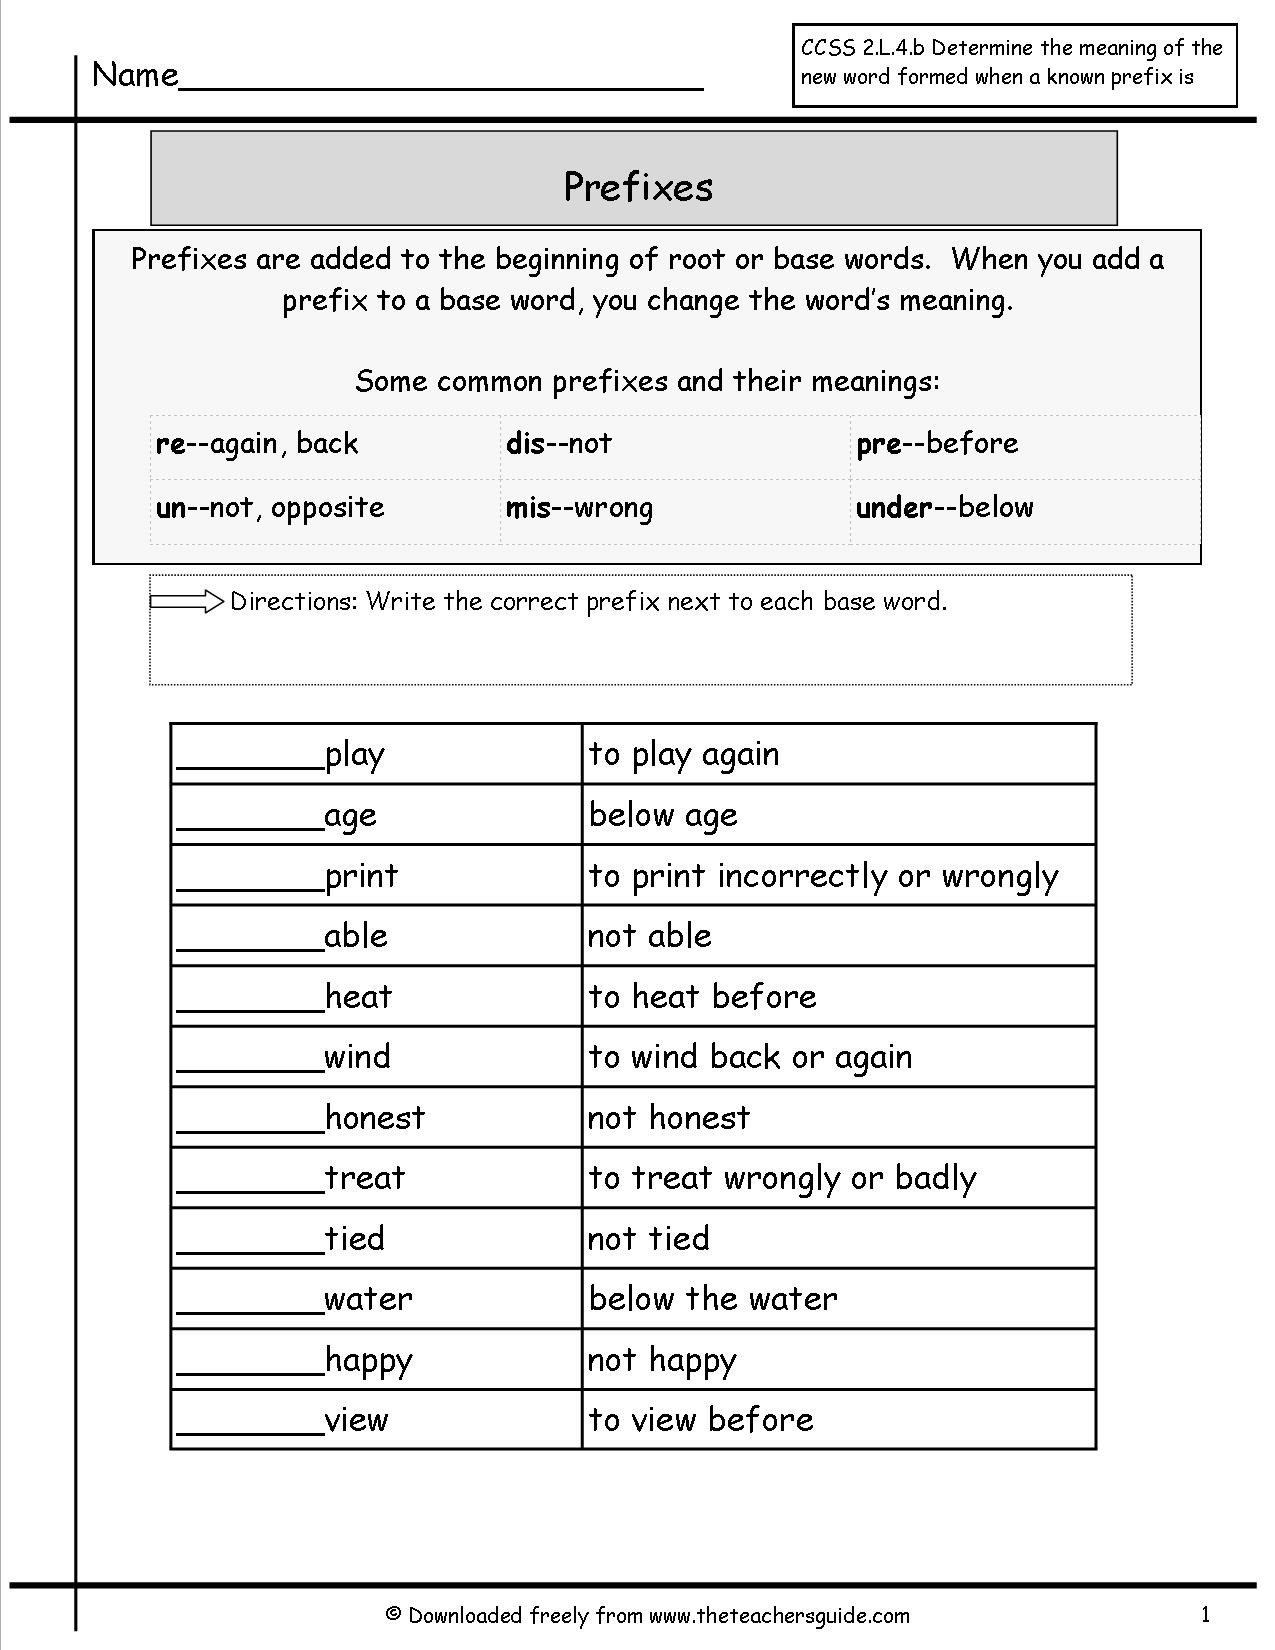 Prefixes Worksheets 3rd Grade Free Prefixes and Suffixes Worksheets From the Teacher S Guide